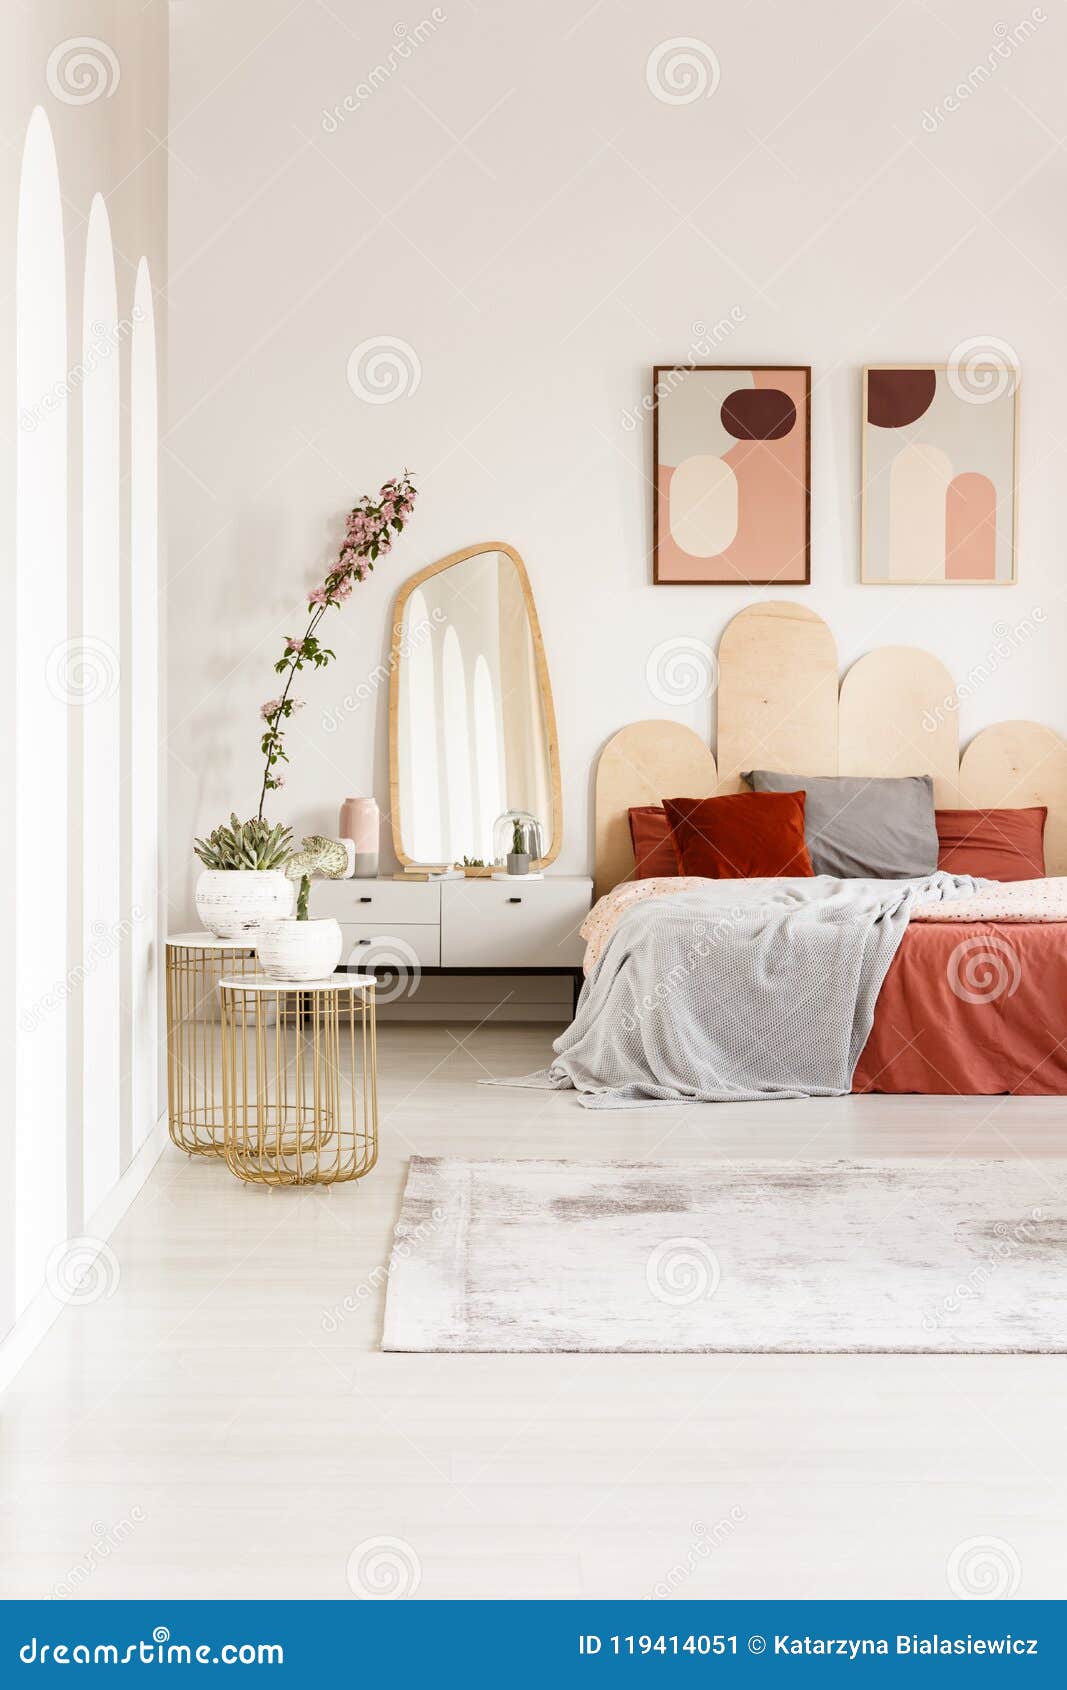 Real Photo Of A Bed With Red And White Bedding Standing Next